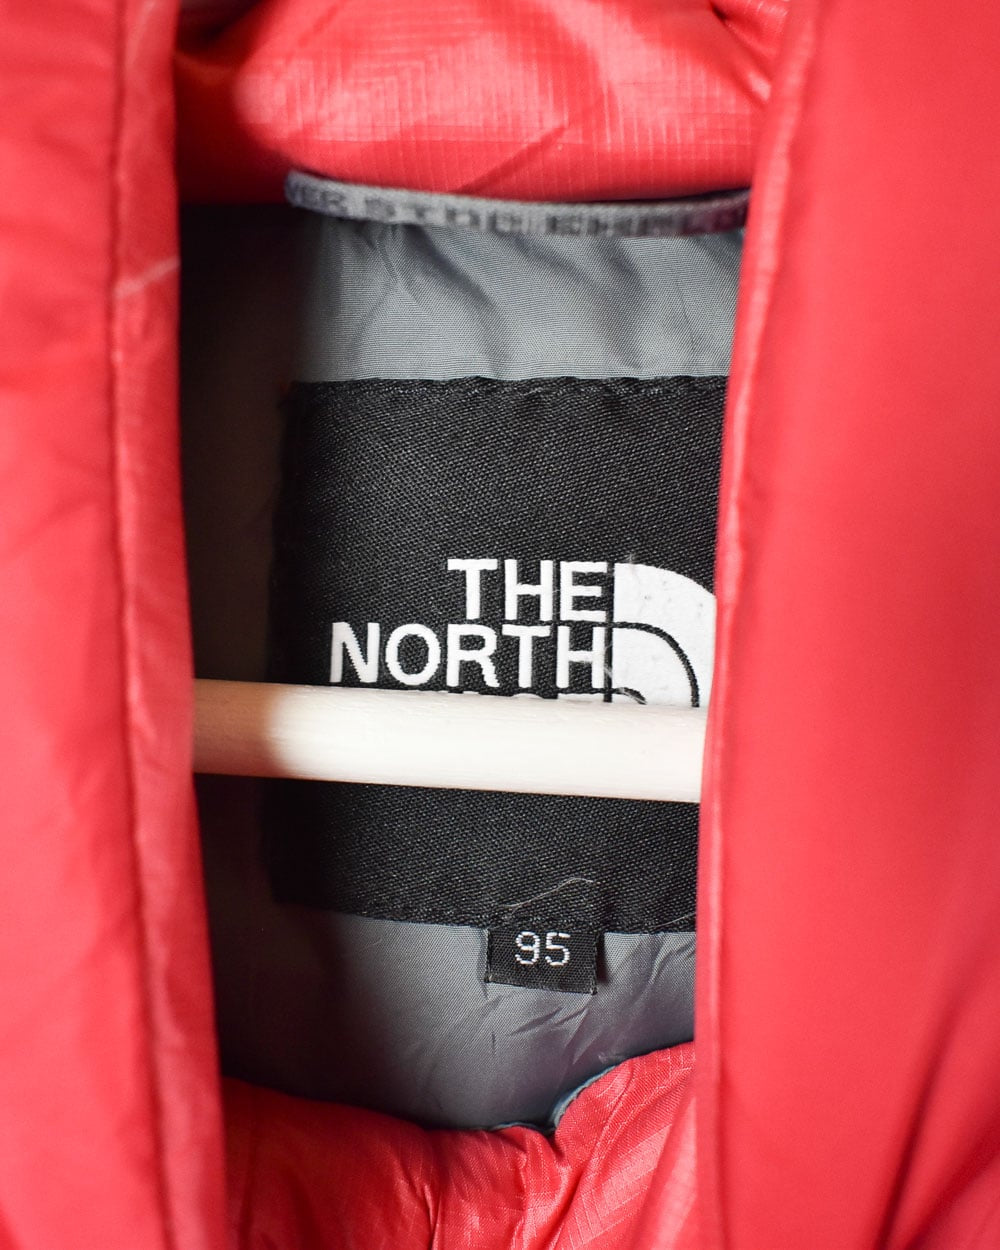 Red The North Face Nuptse 700 Down Puffer Jacket - X-Large women's